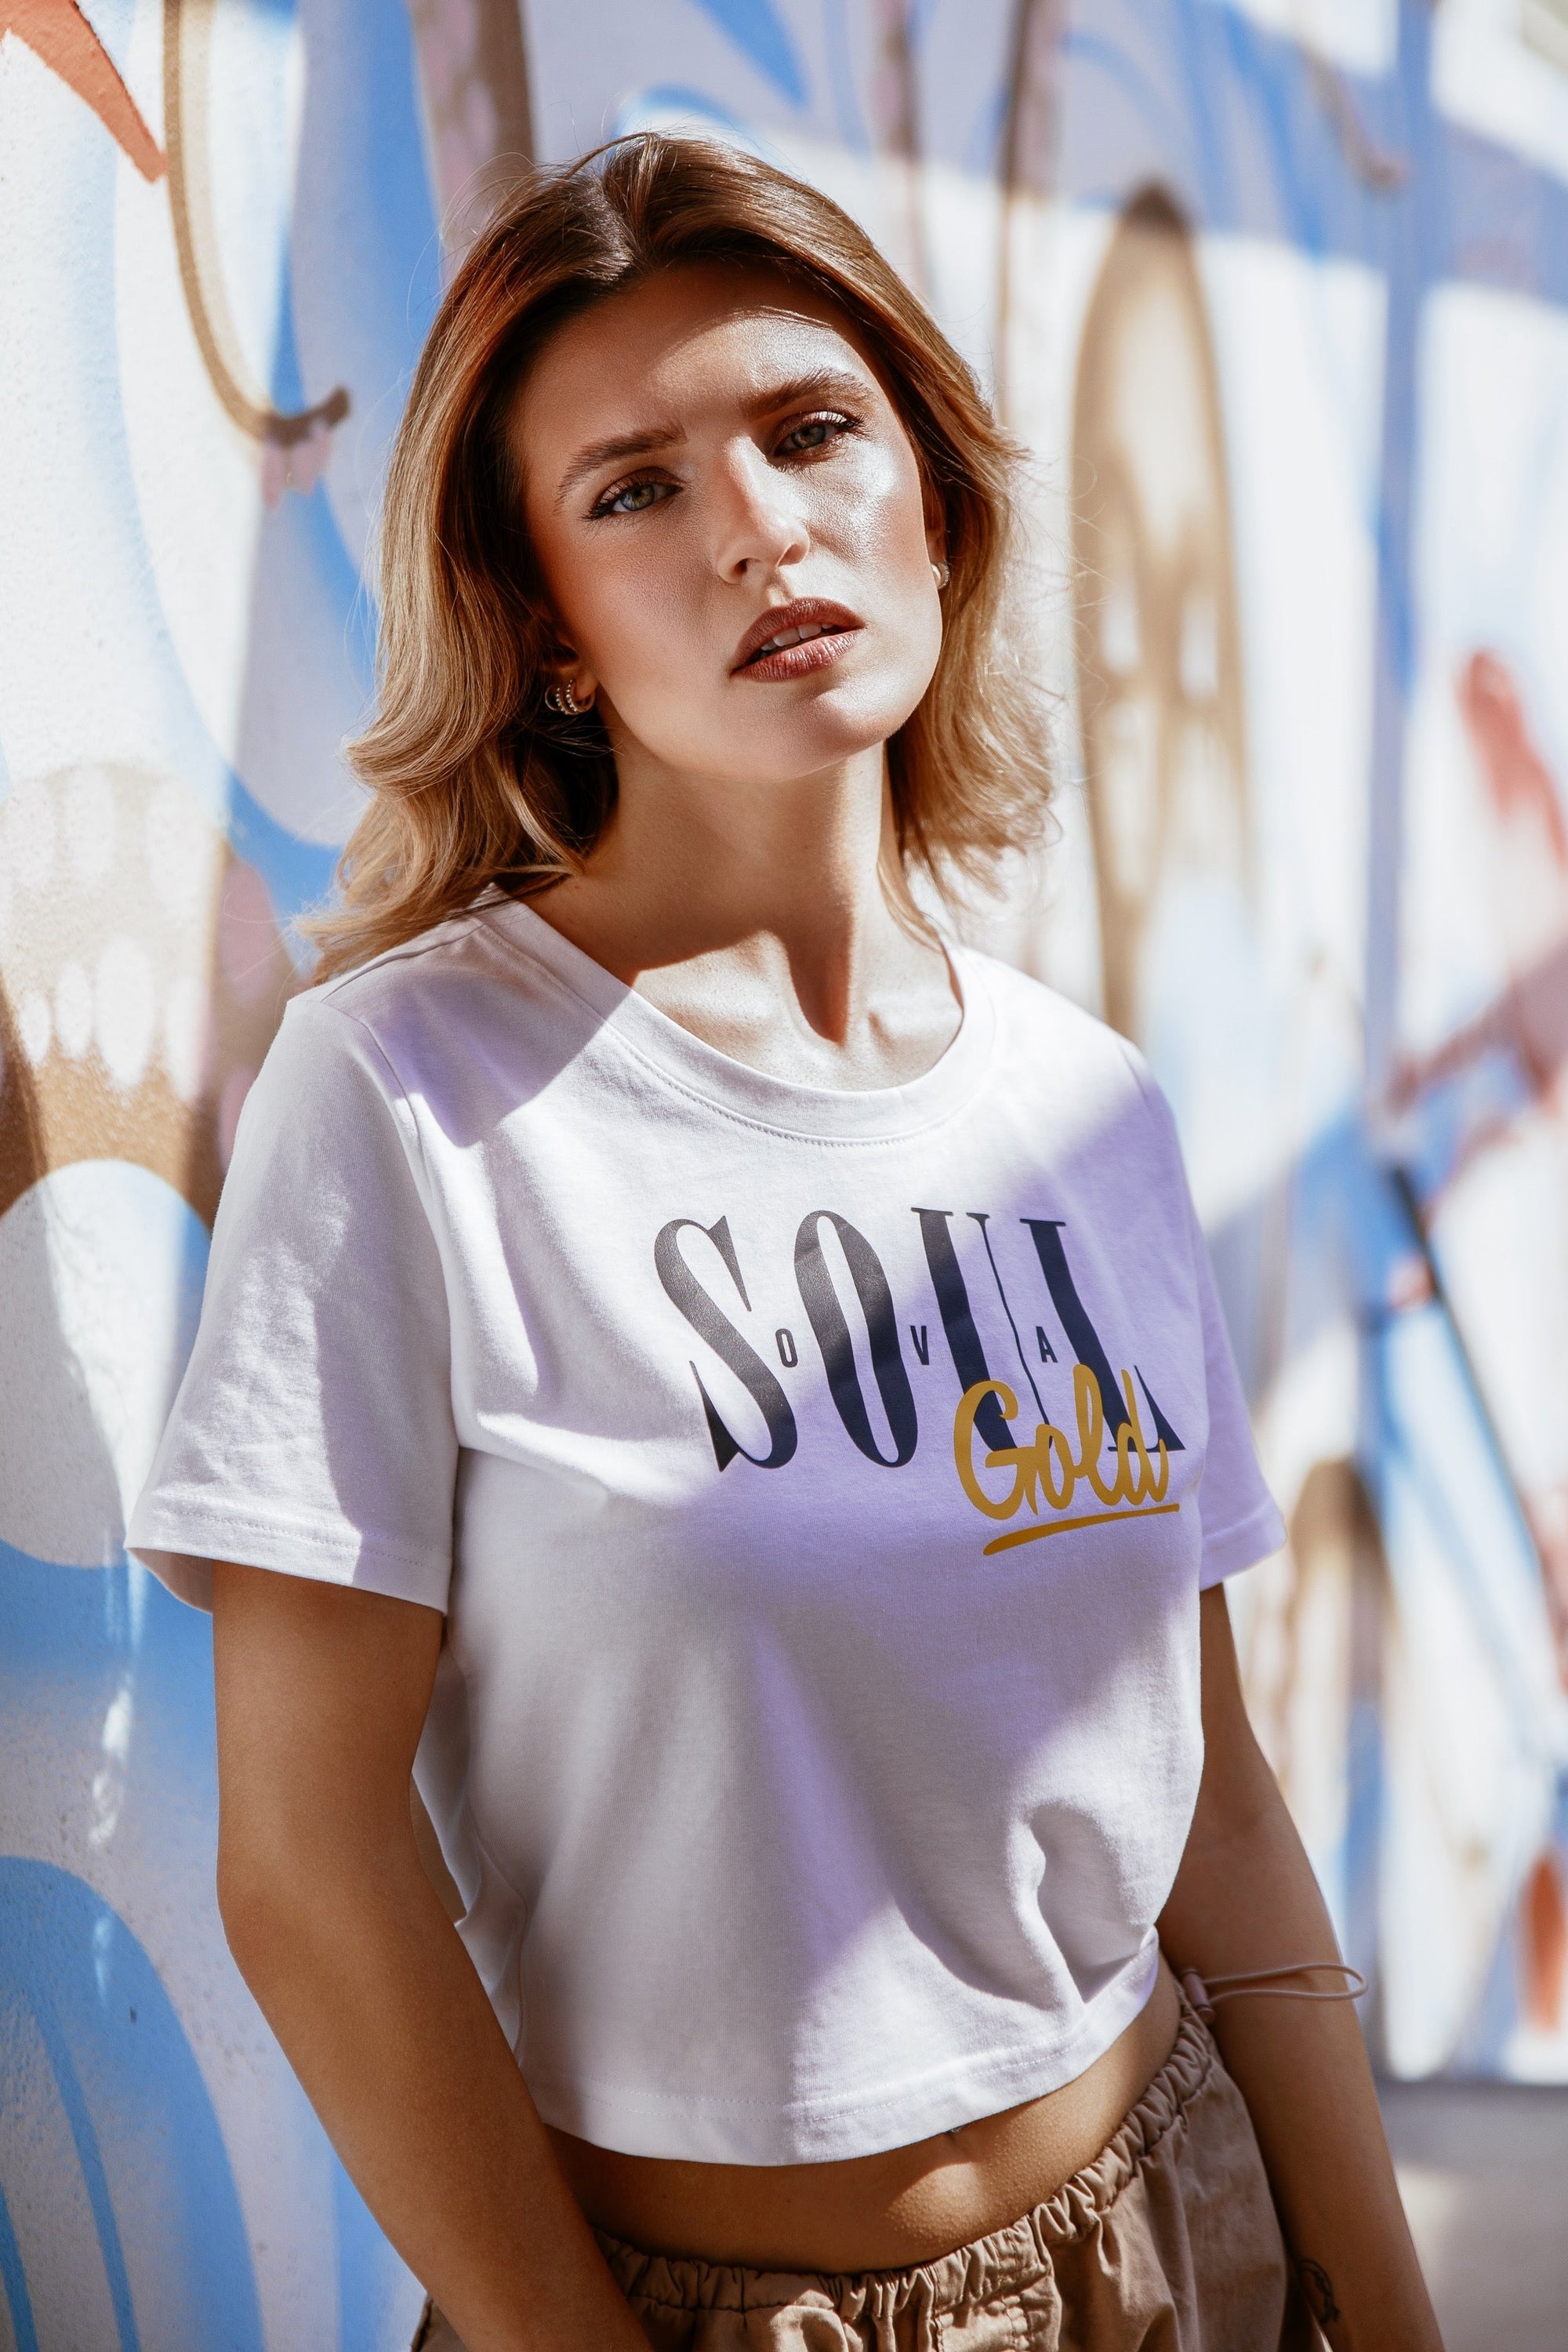 Soul Ova Gold Women's Crops Nothing Can Come Between Us Women's Crop Top (White)